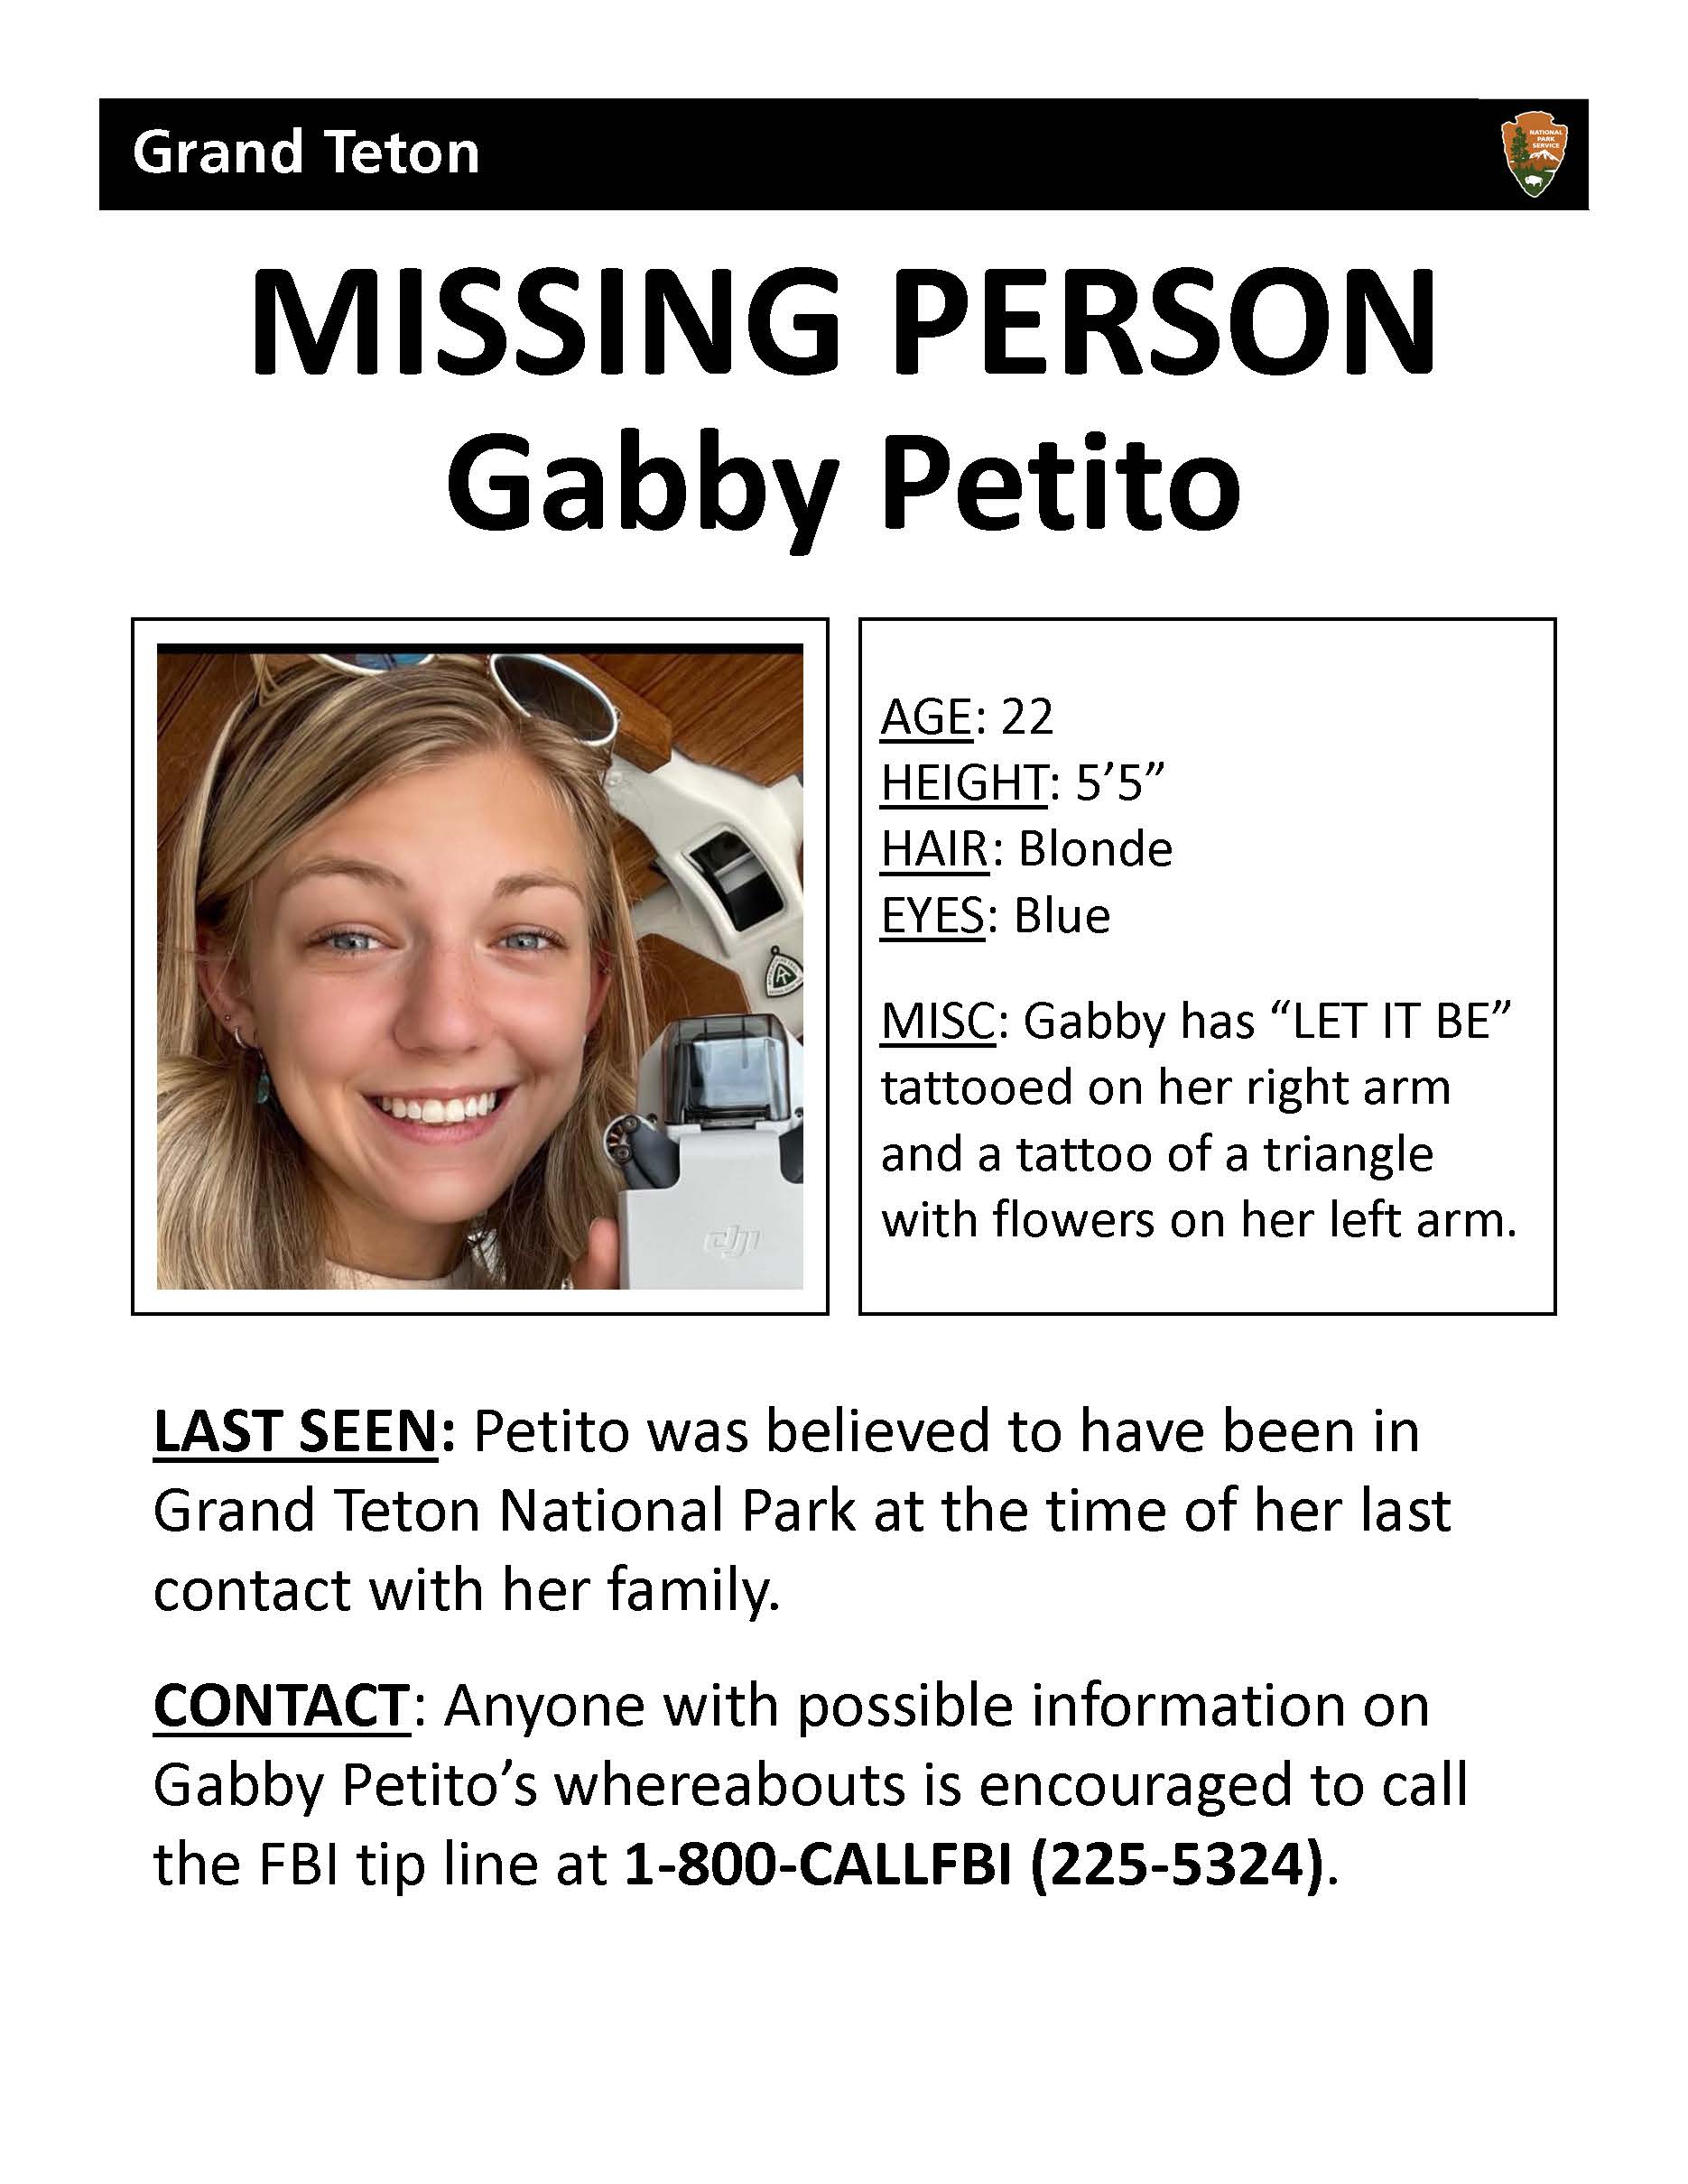 Missing Person Gabby Petito poster